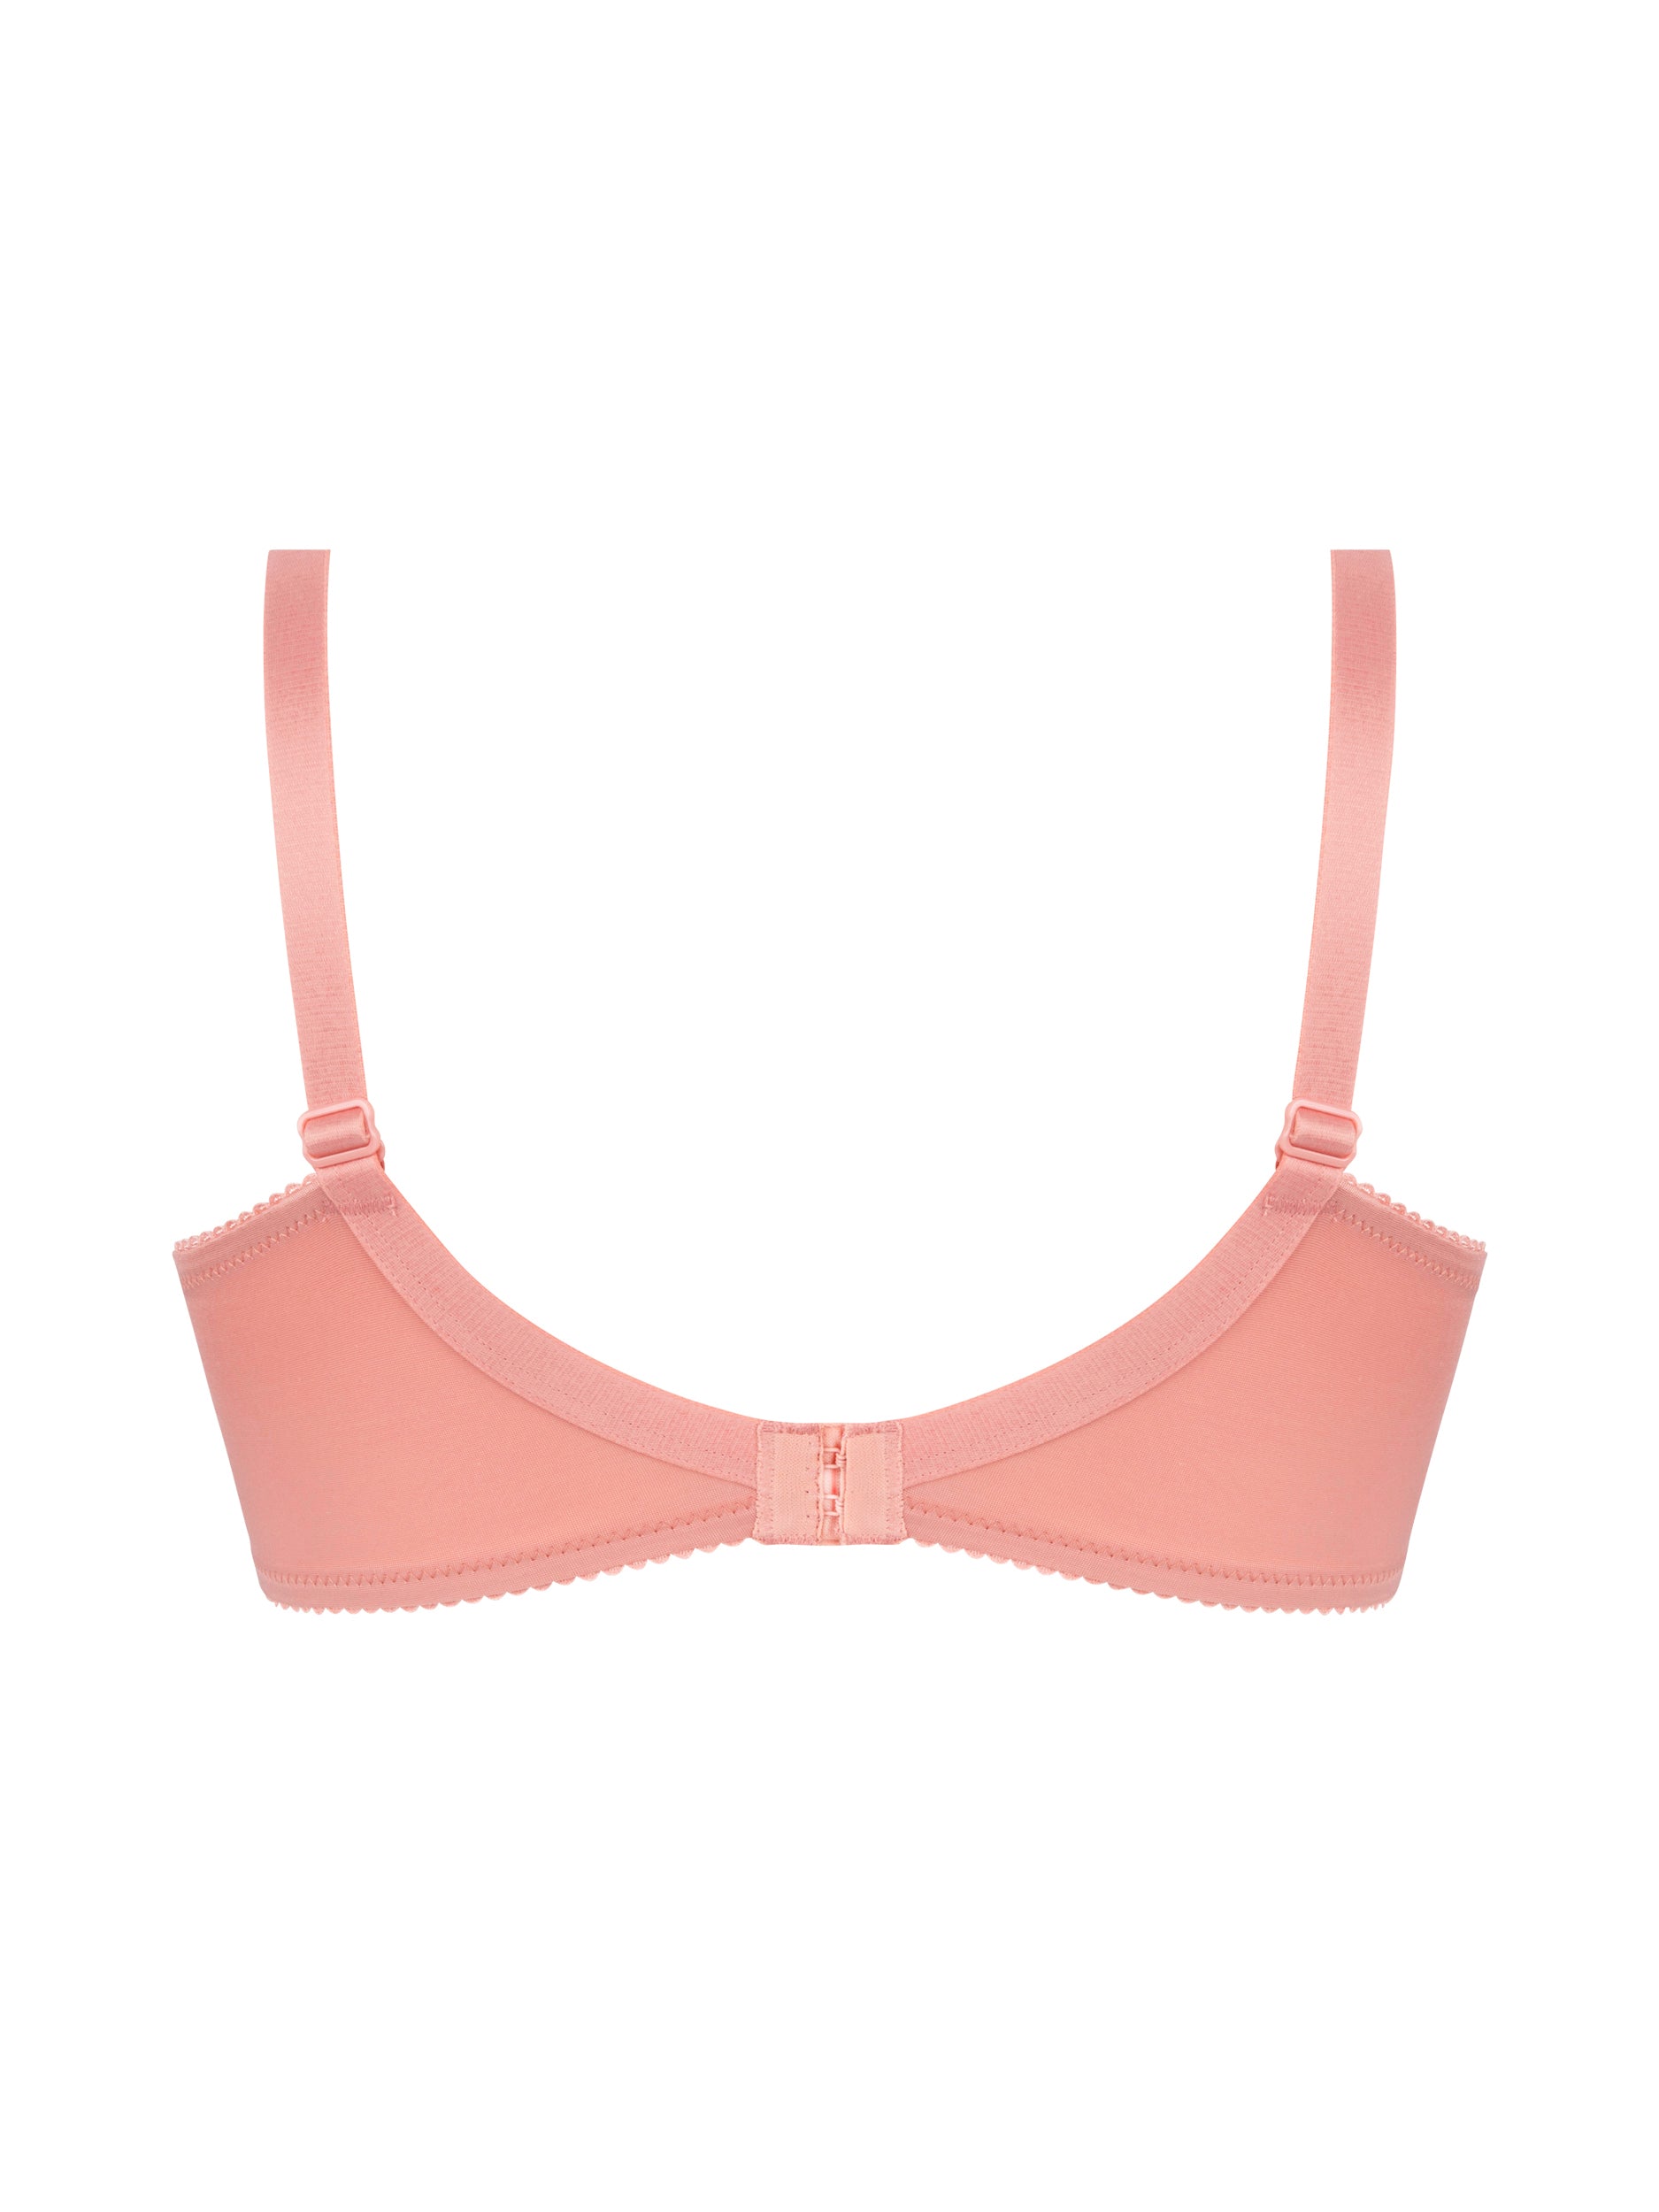 Splendeur Soie Silk Contour Bra in Sensual Rose - For Her from The Luxe  Company UK